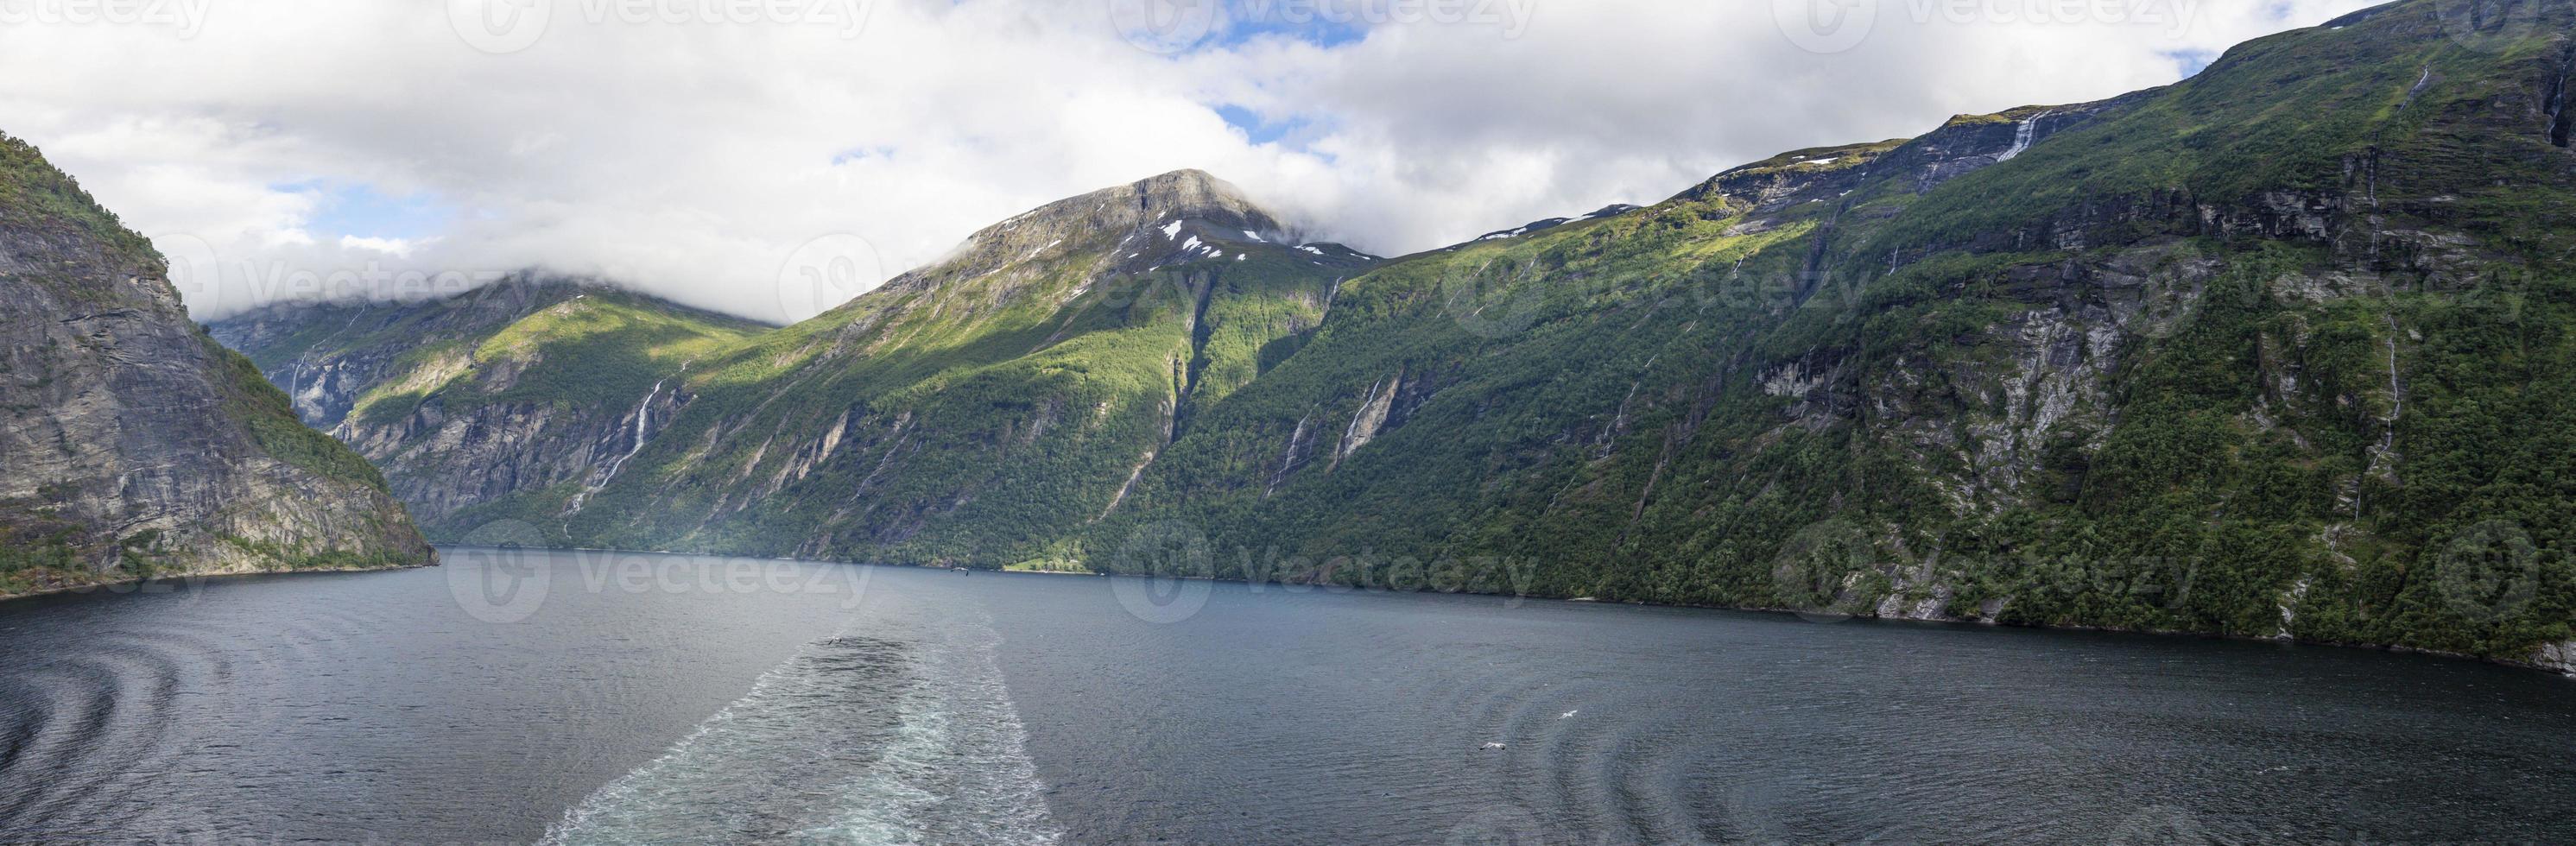 Impression from cruise ship on the way through Geiranger fjord in Norway at sunrise in summer photo